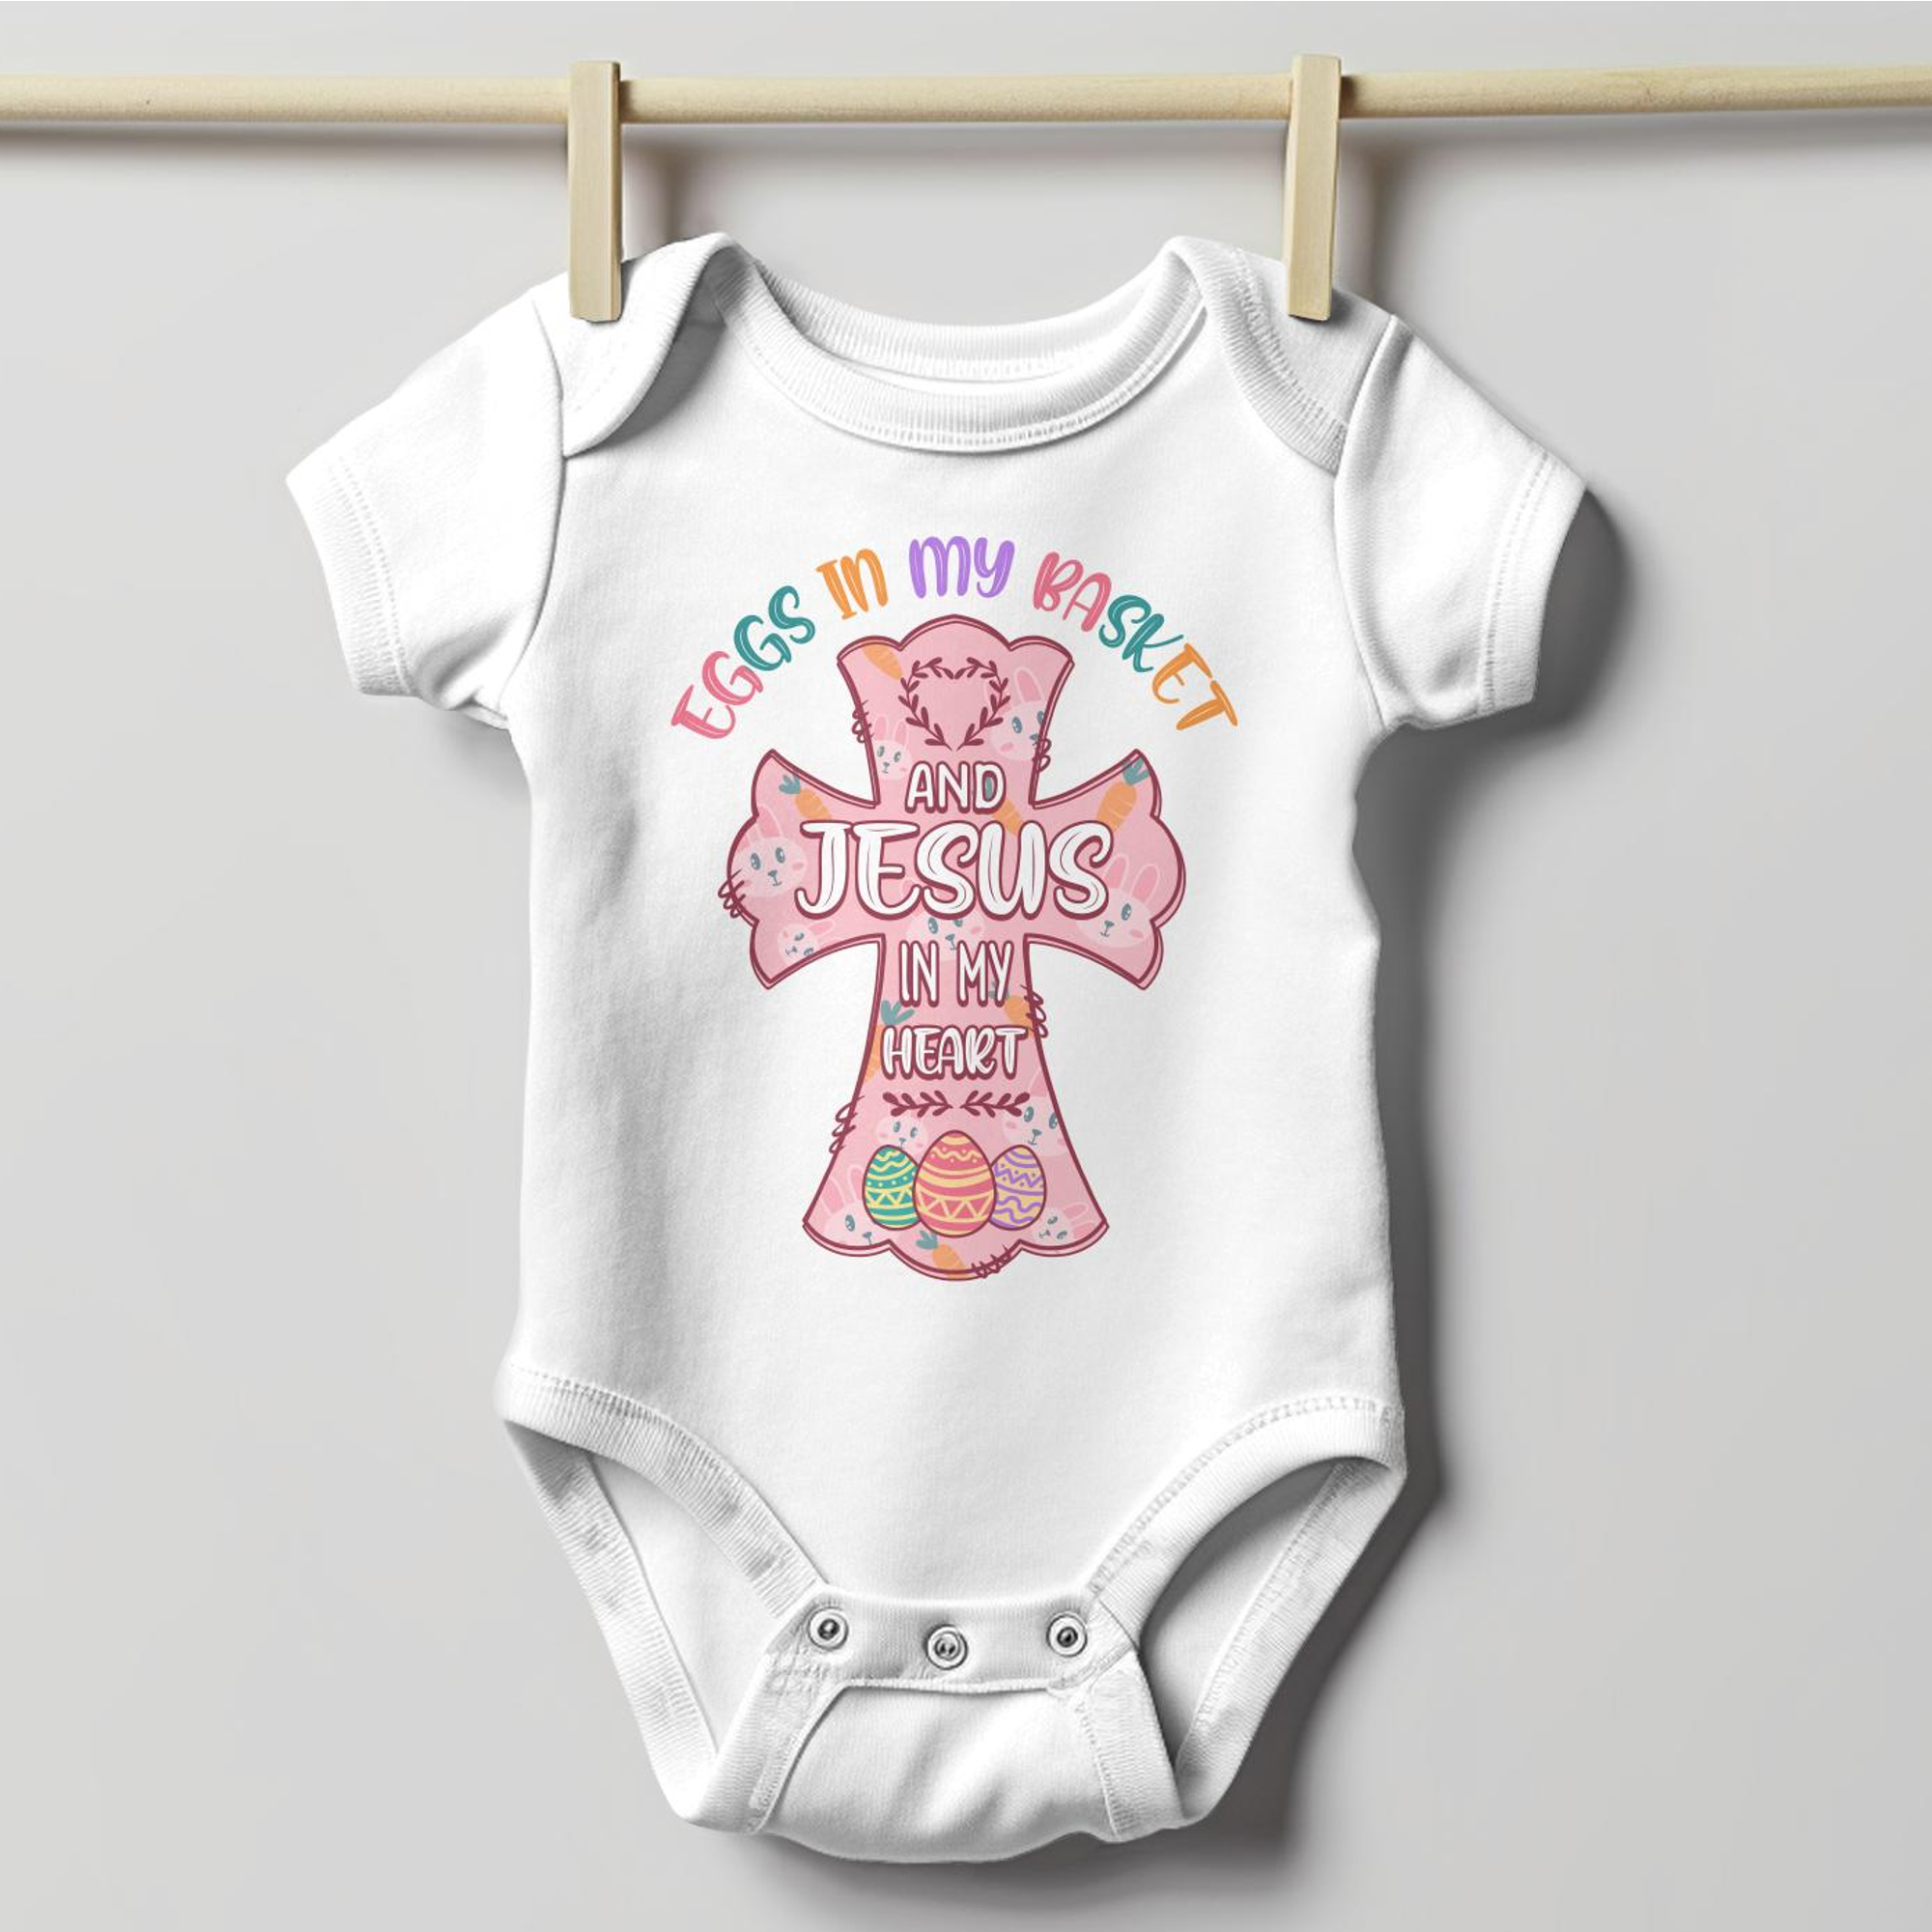 Eggs in My Basket Jesus in My Heart Infant Fine Jersey Bodysuit Size: 6mo Color: White Jesus Passion Apparel